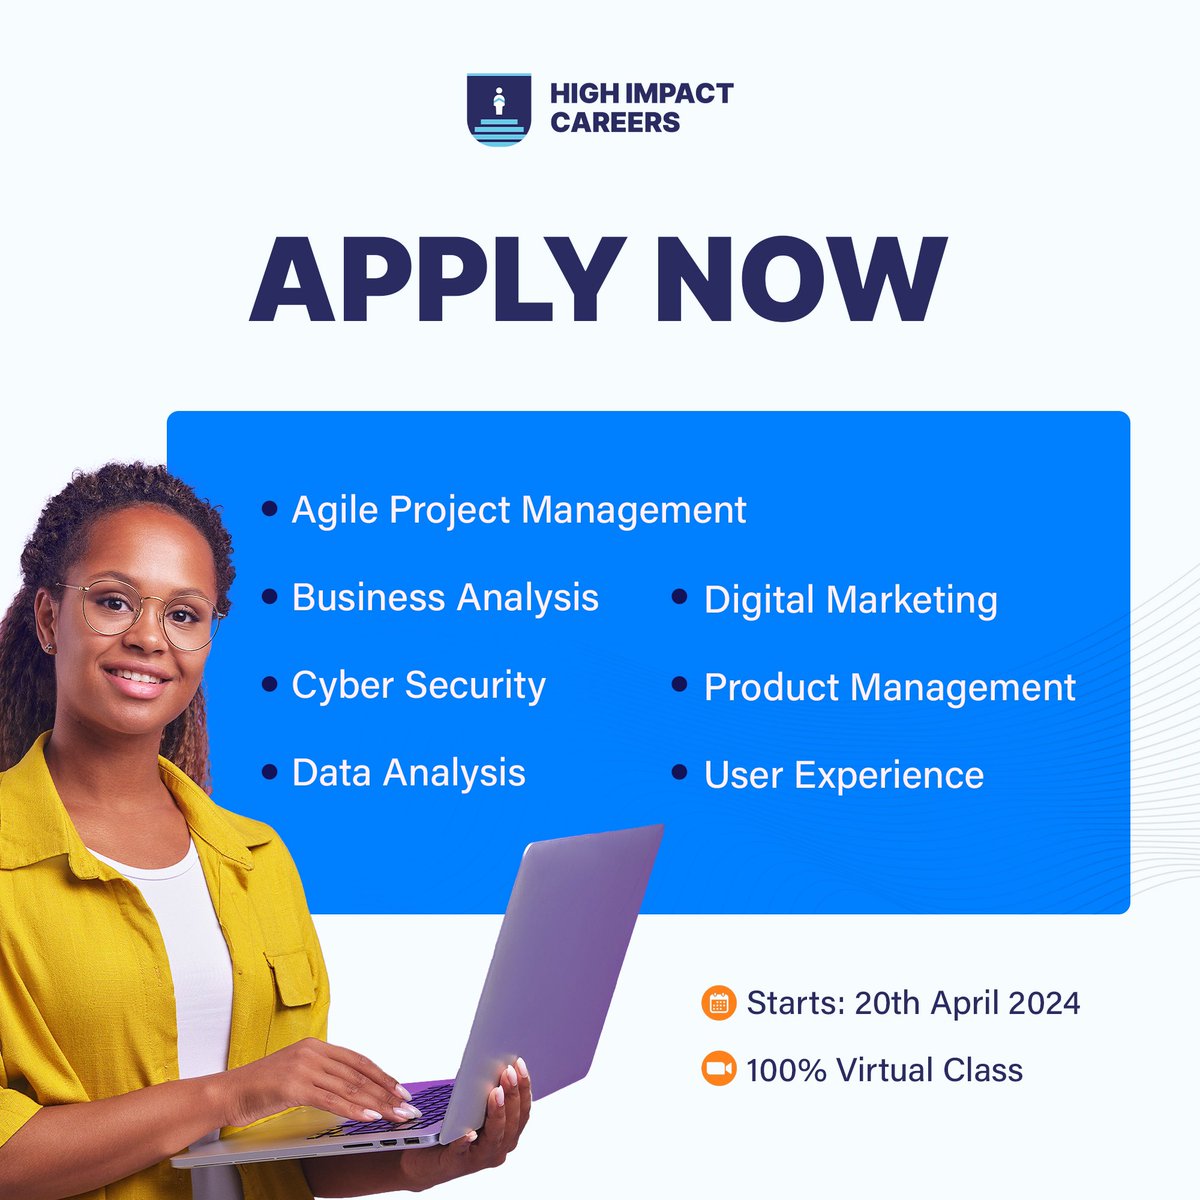 Deadline for registration for @HighImpact01’s Tech Bootcamp has been extended until 18th April. Take one of these courses and SWITCH INTO TECH: •Business Analysis •Cyber Security •Data Analysis •Product Management •Project Management Enrol today via highimpactcareers.co.uk/bootcamp/